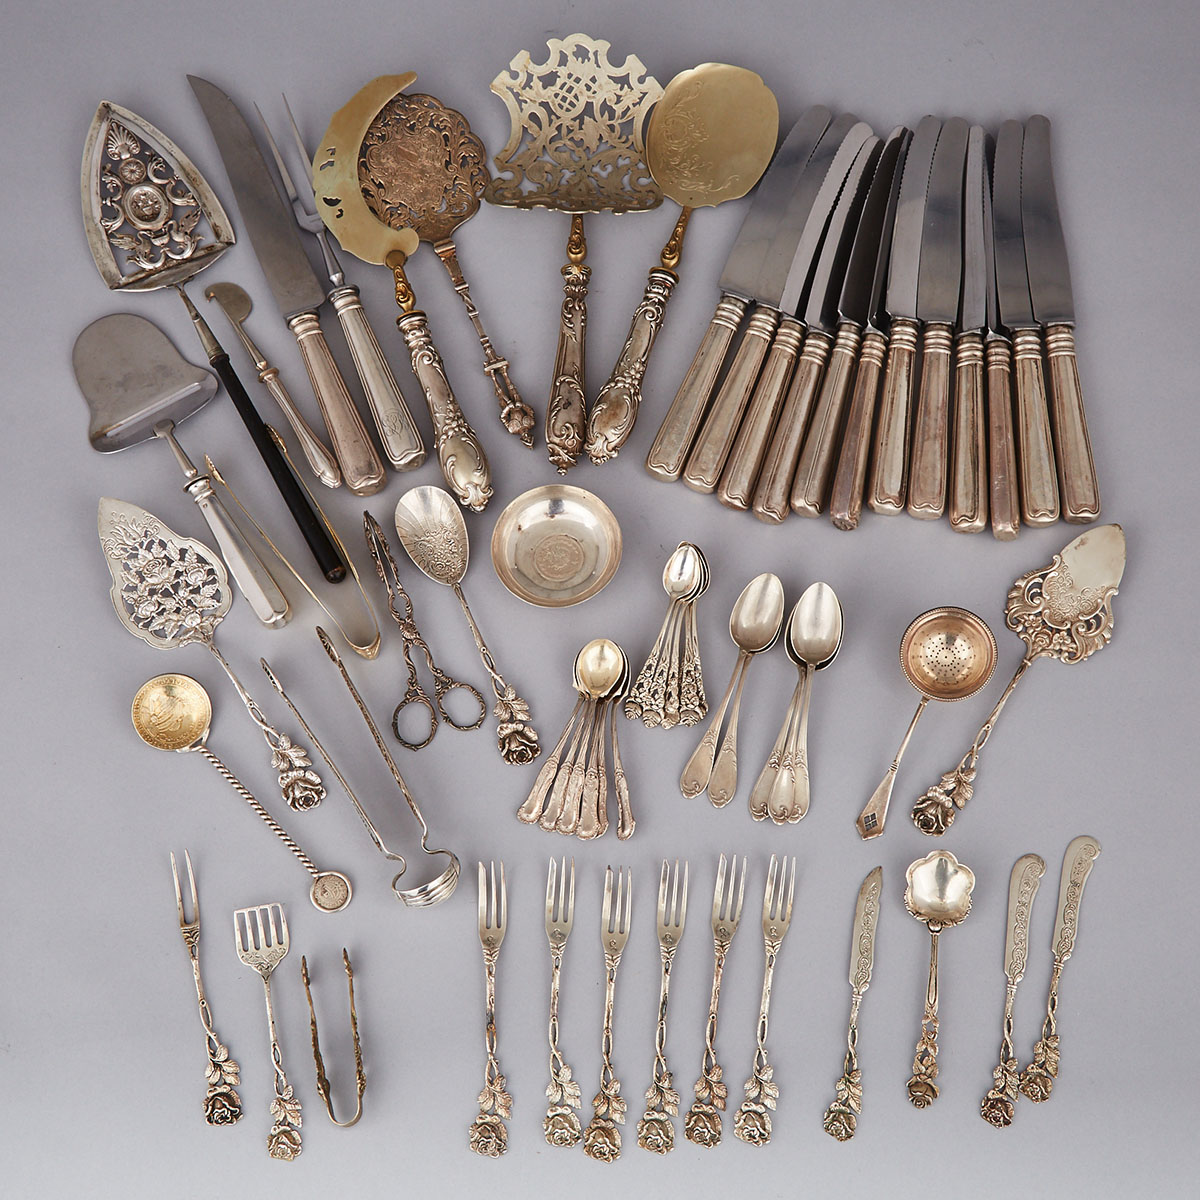 Group of Mainly Continental Silver Flatware, 19th/20th century